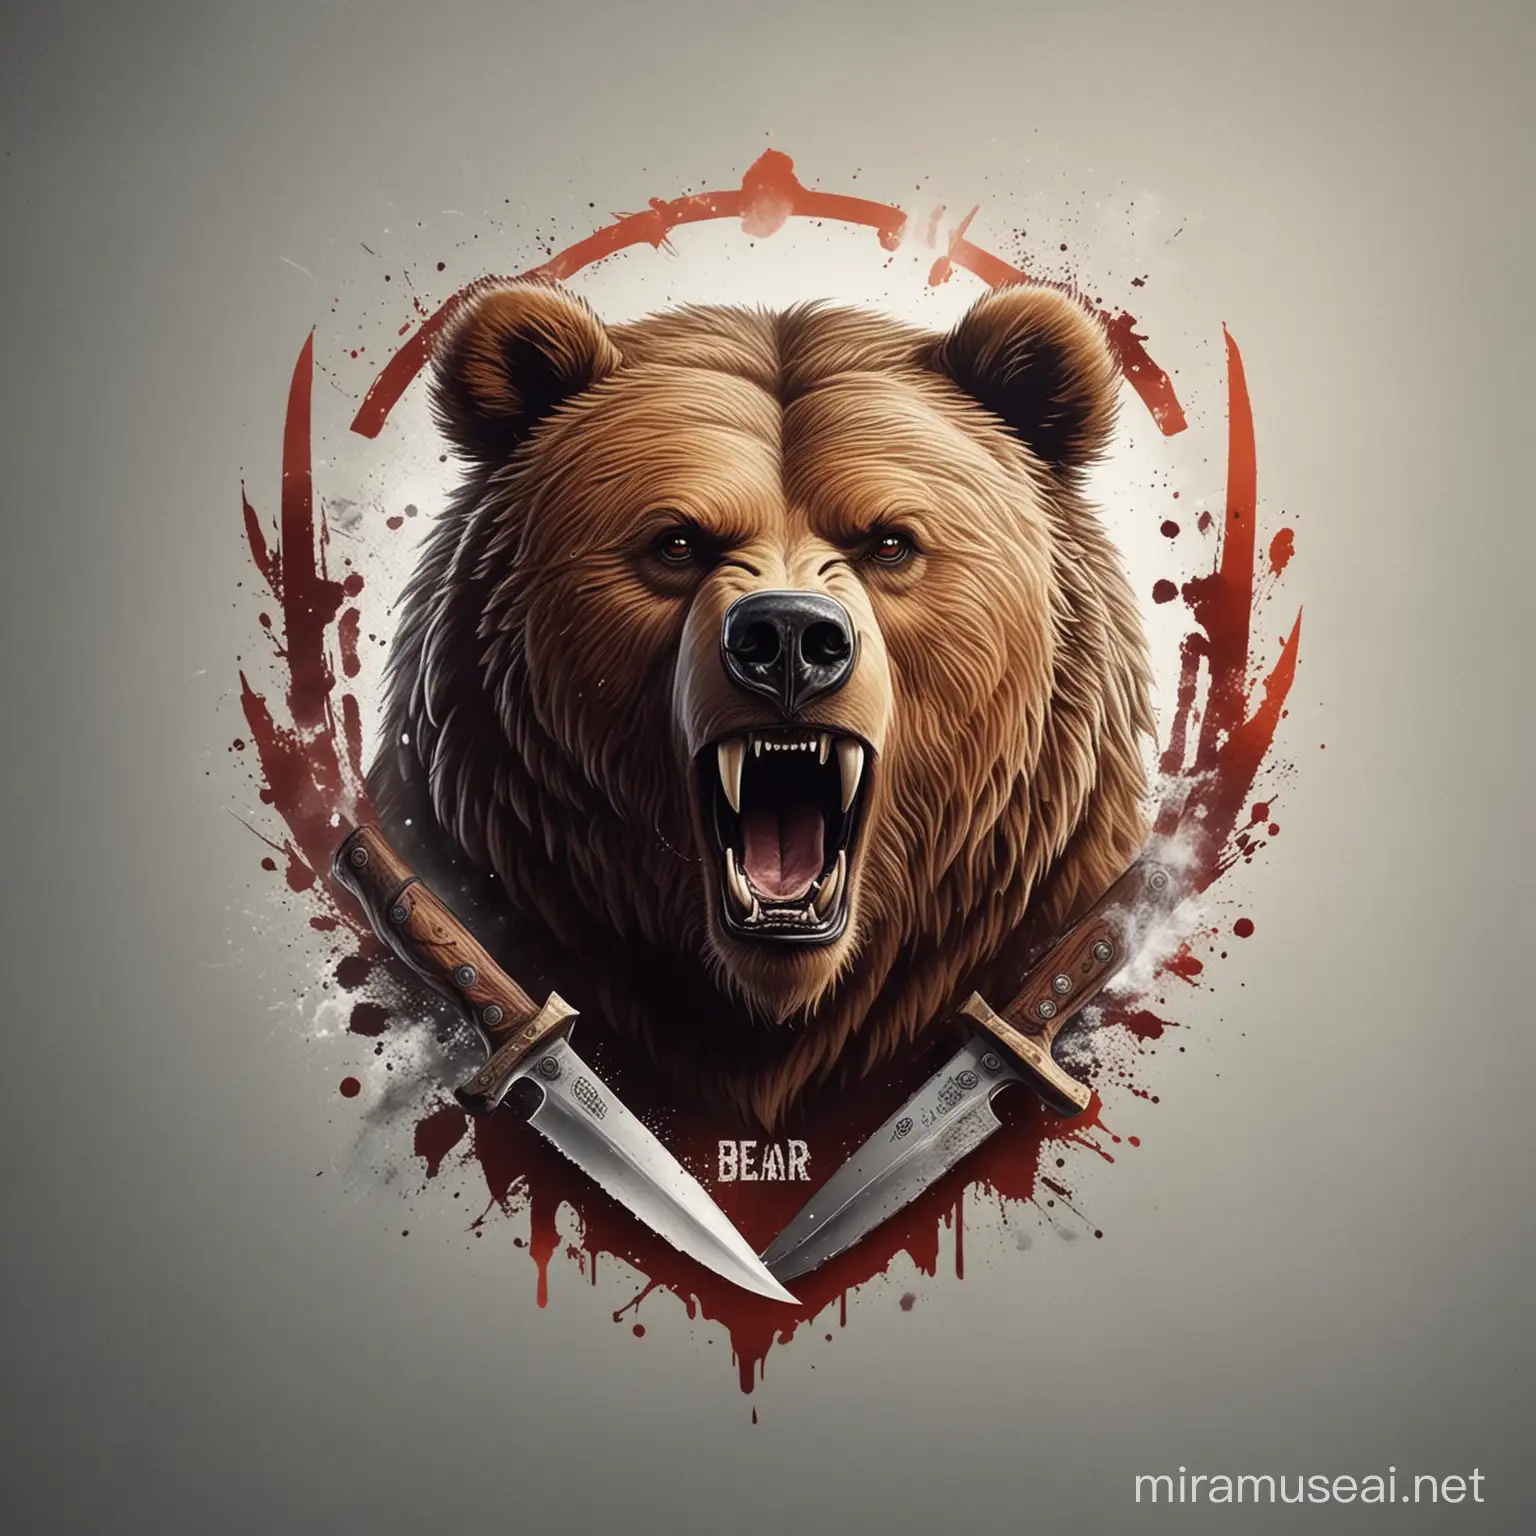 ,,BEAR", professional logo, logo with grizzly head, smoke that radiates power and intensity, with knife.
